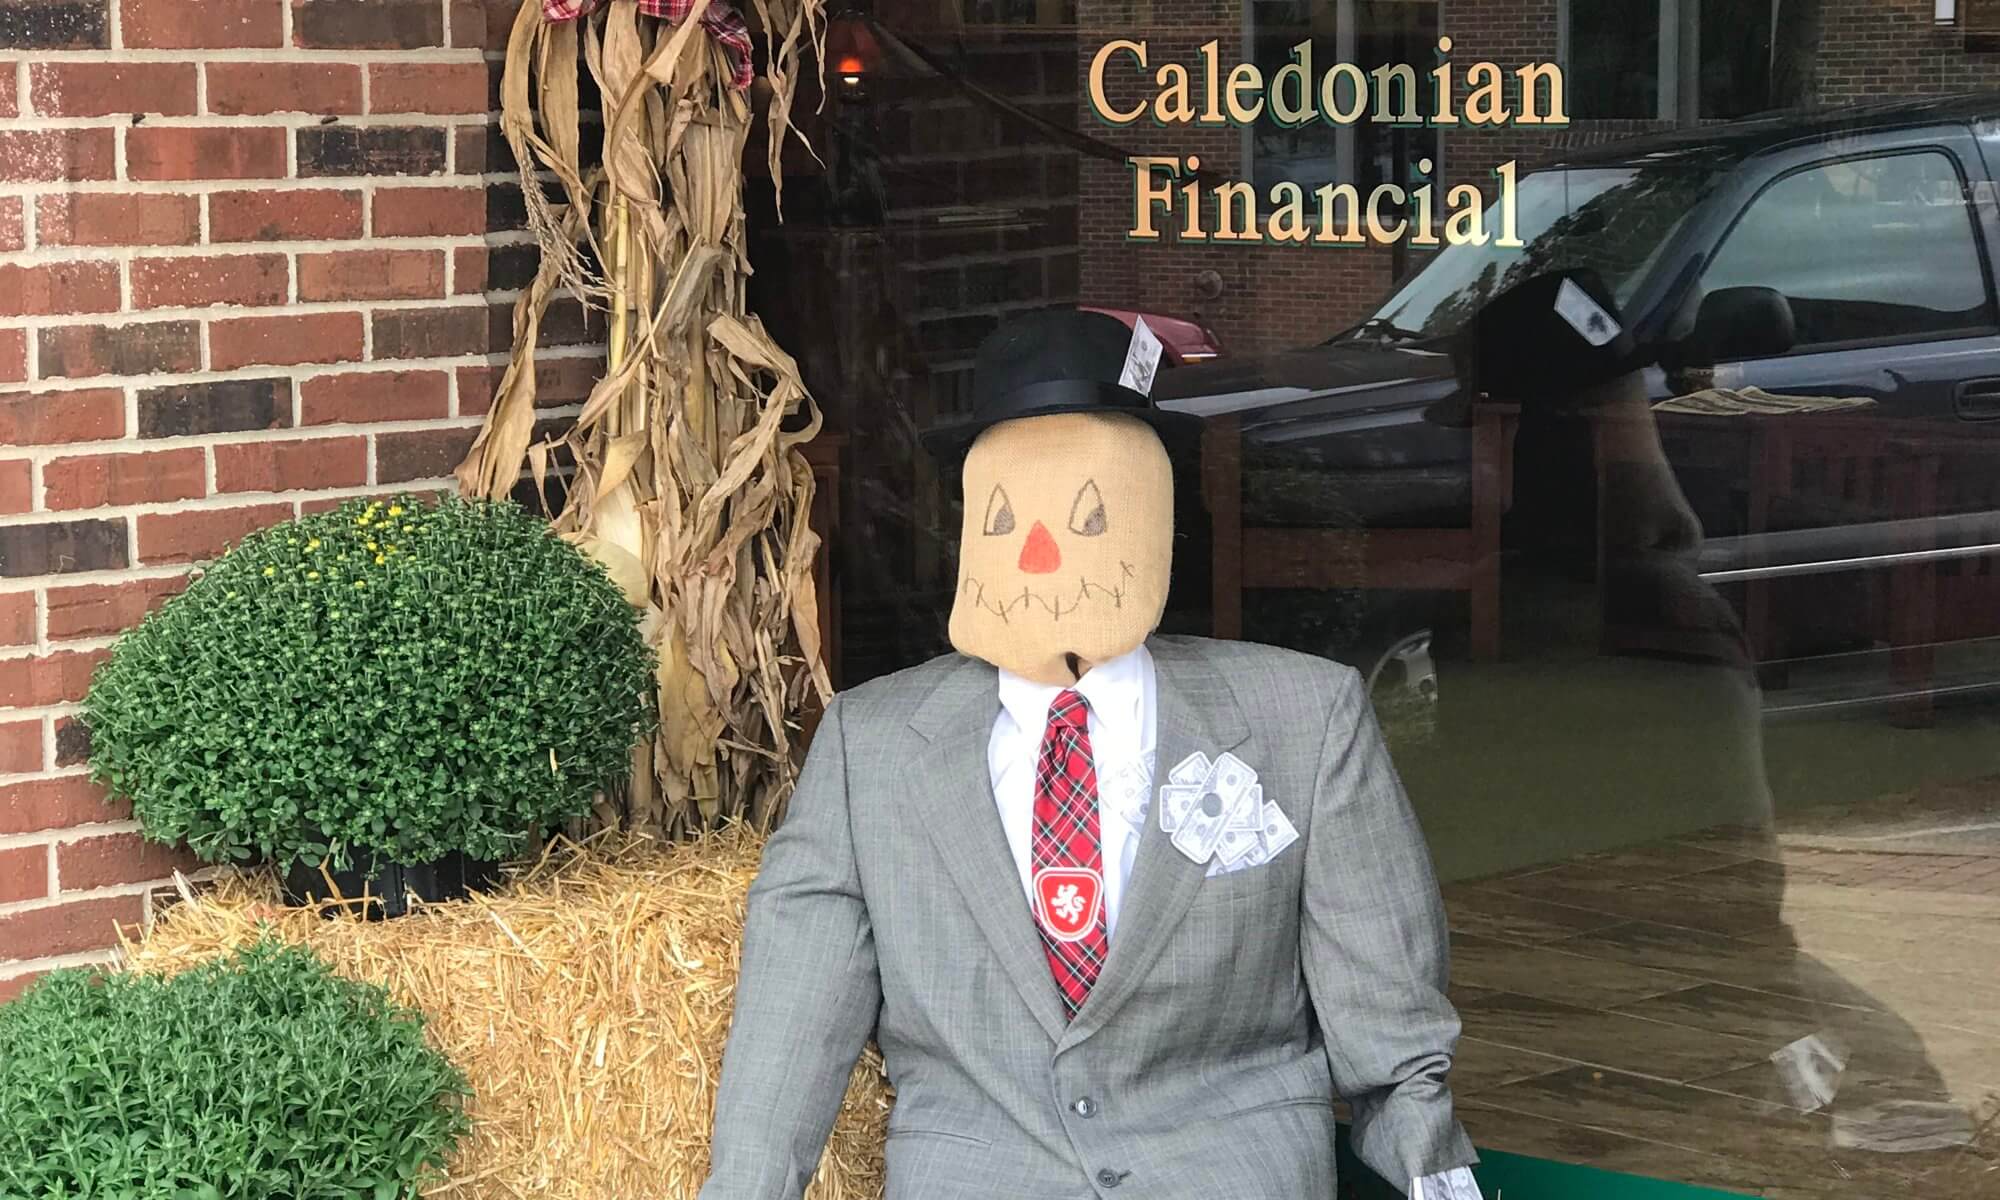 Caledonian Financial's entry in the Maury County Visitors Bureau scarecrow contest.